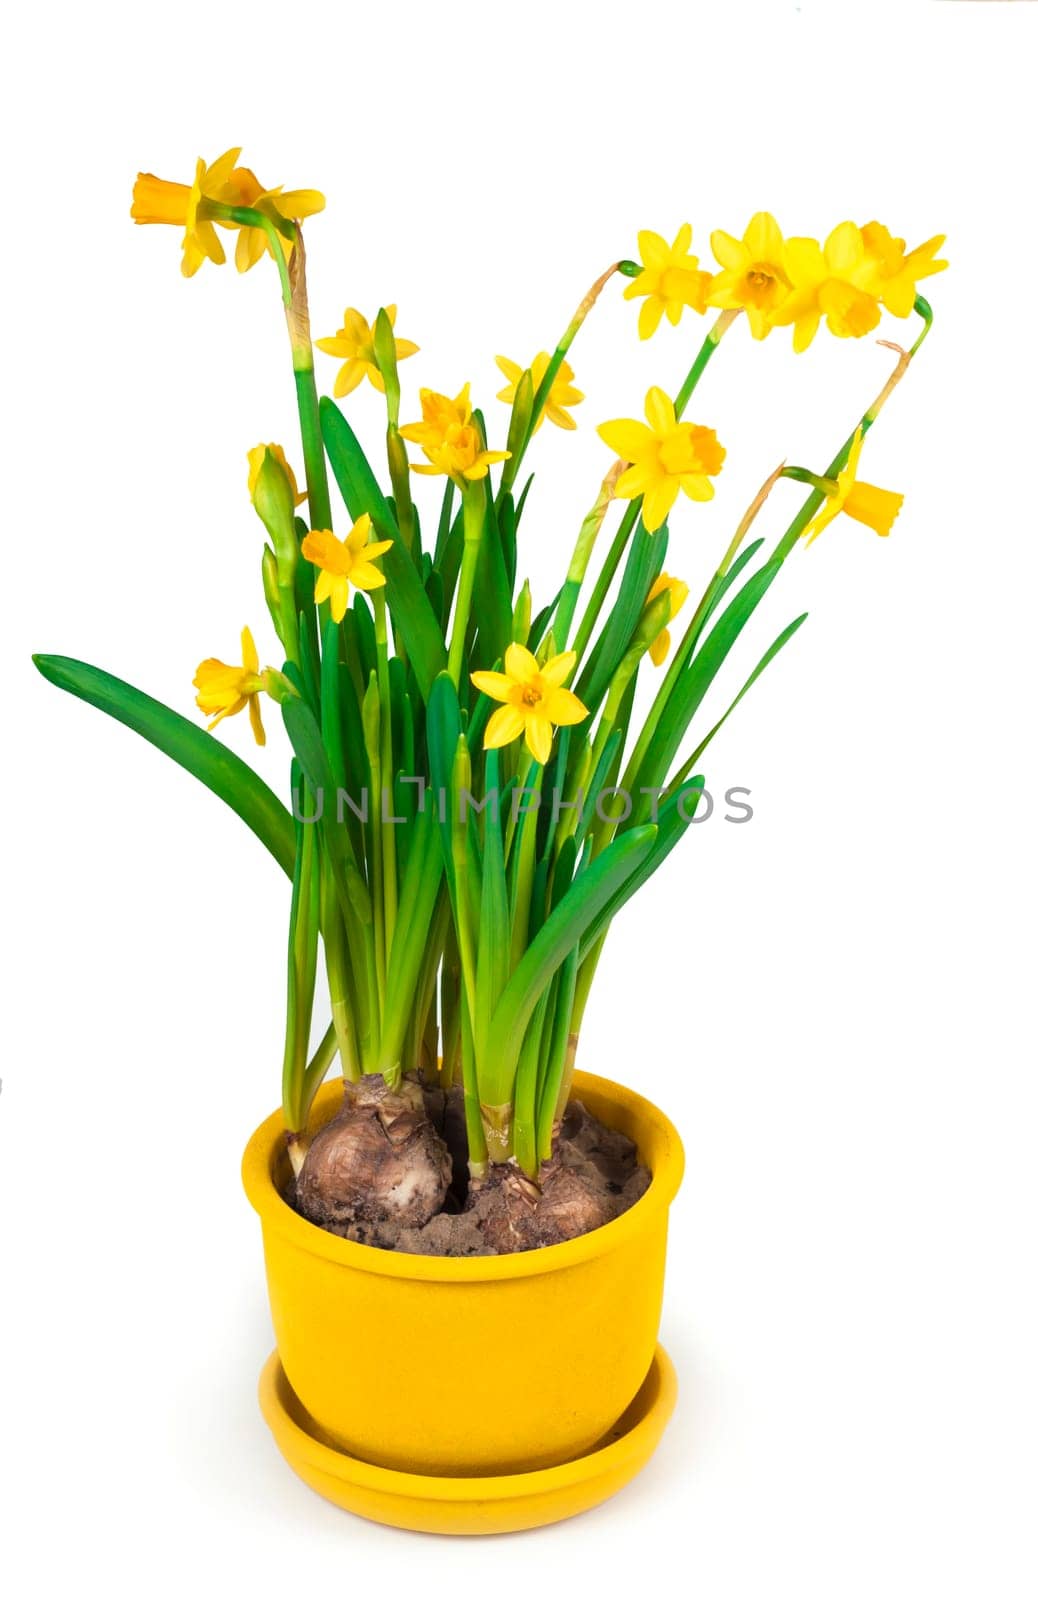 Potted blooming yellow daffodil spring flowers isolated on white background by aprilphoto